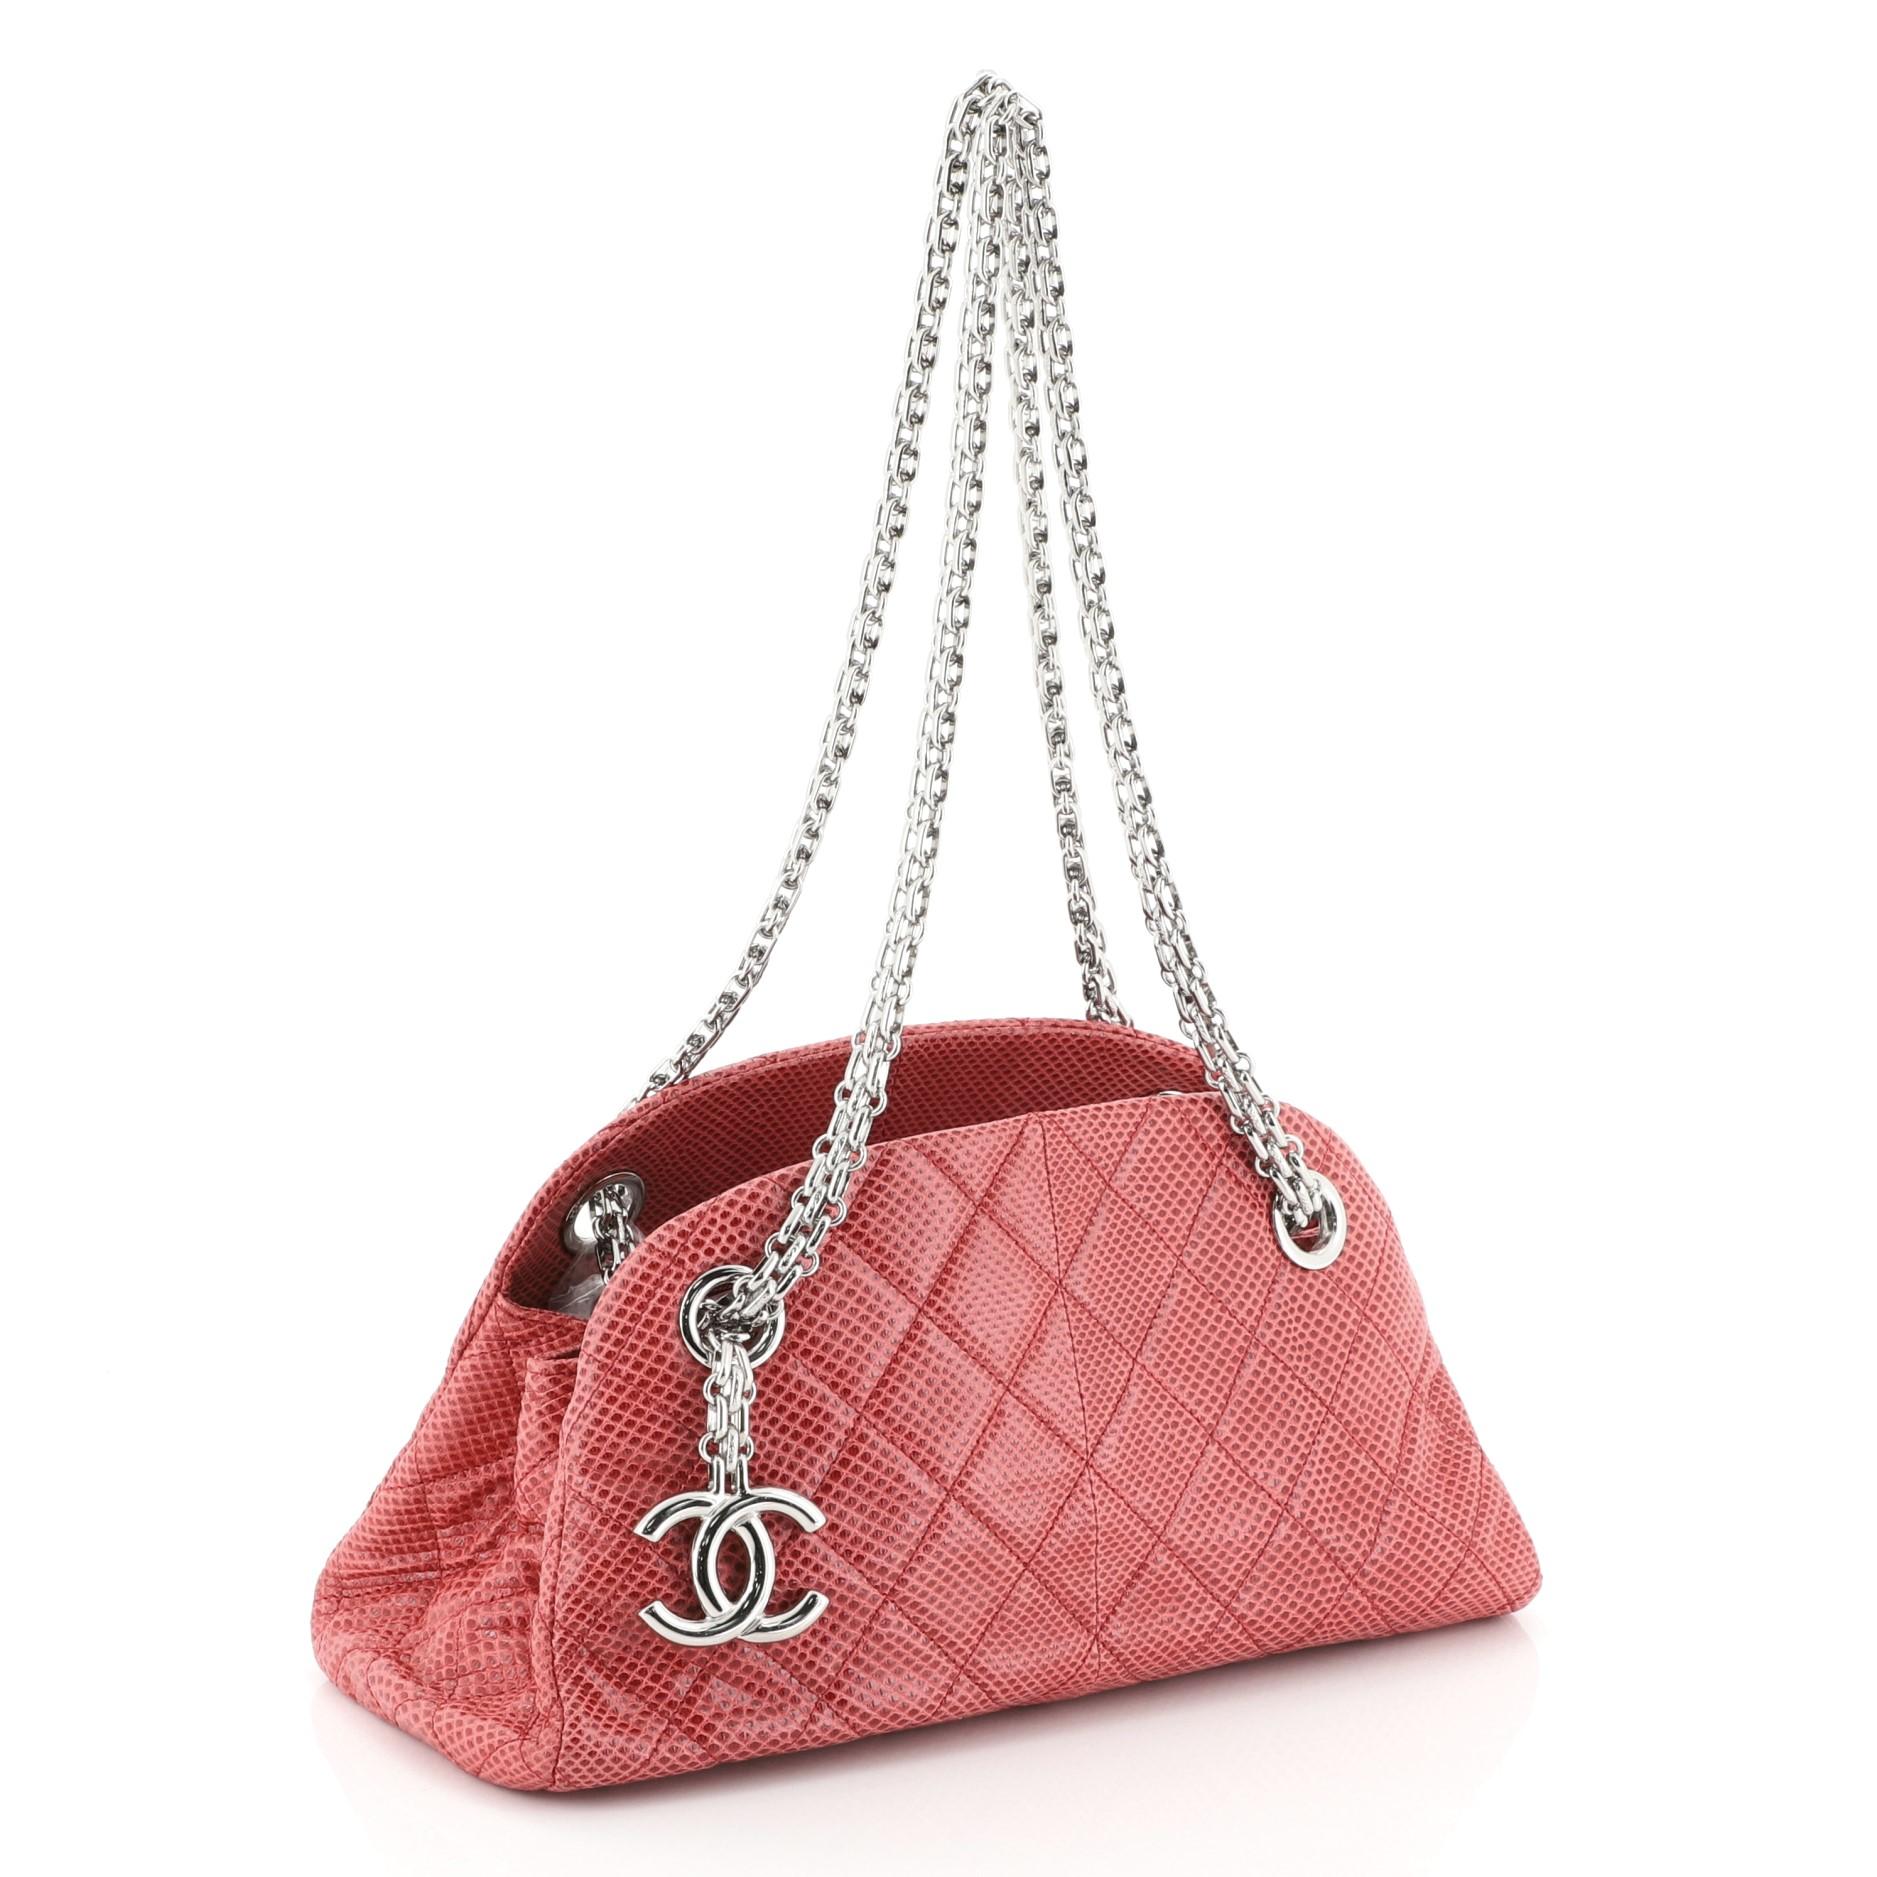 This Chanel Just Mademoiselle Bag Lizard Mini, crafted from genuine pink lizard, features reissue chain strap, interlocking CC logo charm and silver-tone hardware. It opens to a red leather interior. Hologram sticker reads: 14880238.  This item can